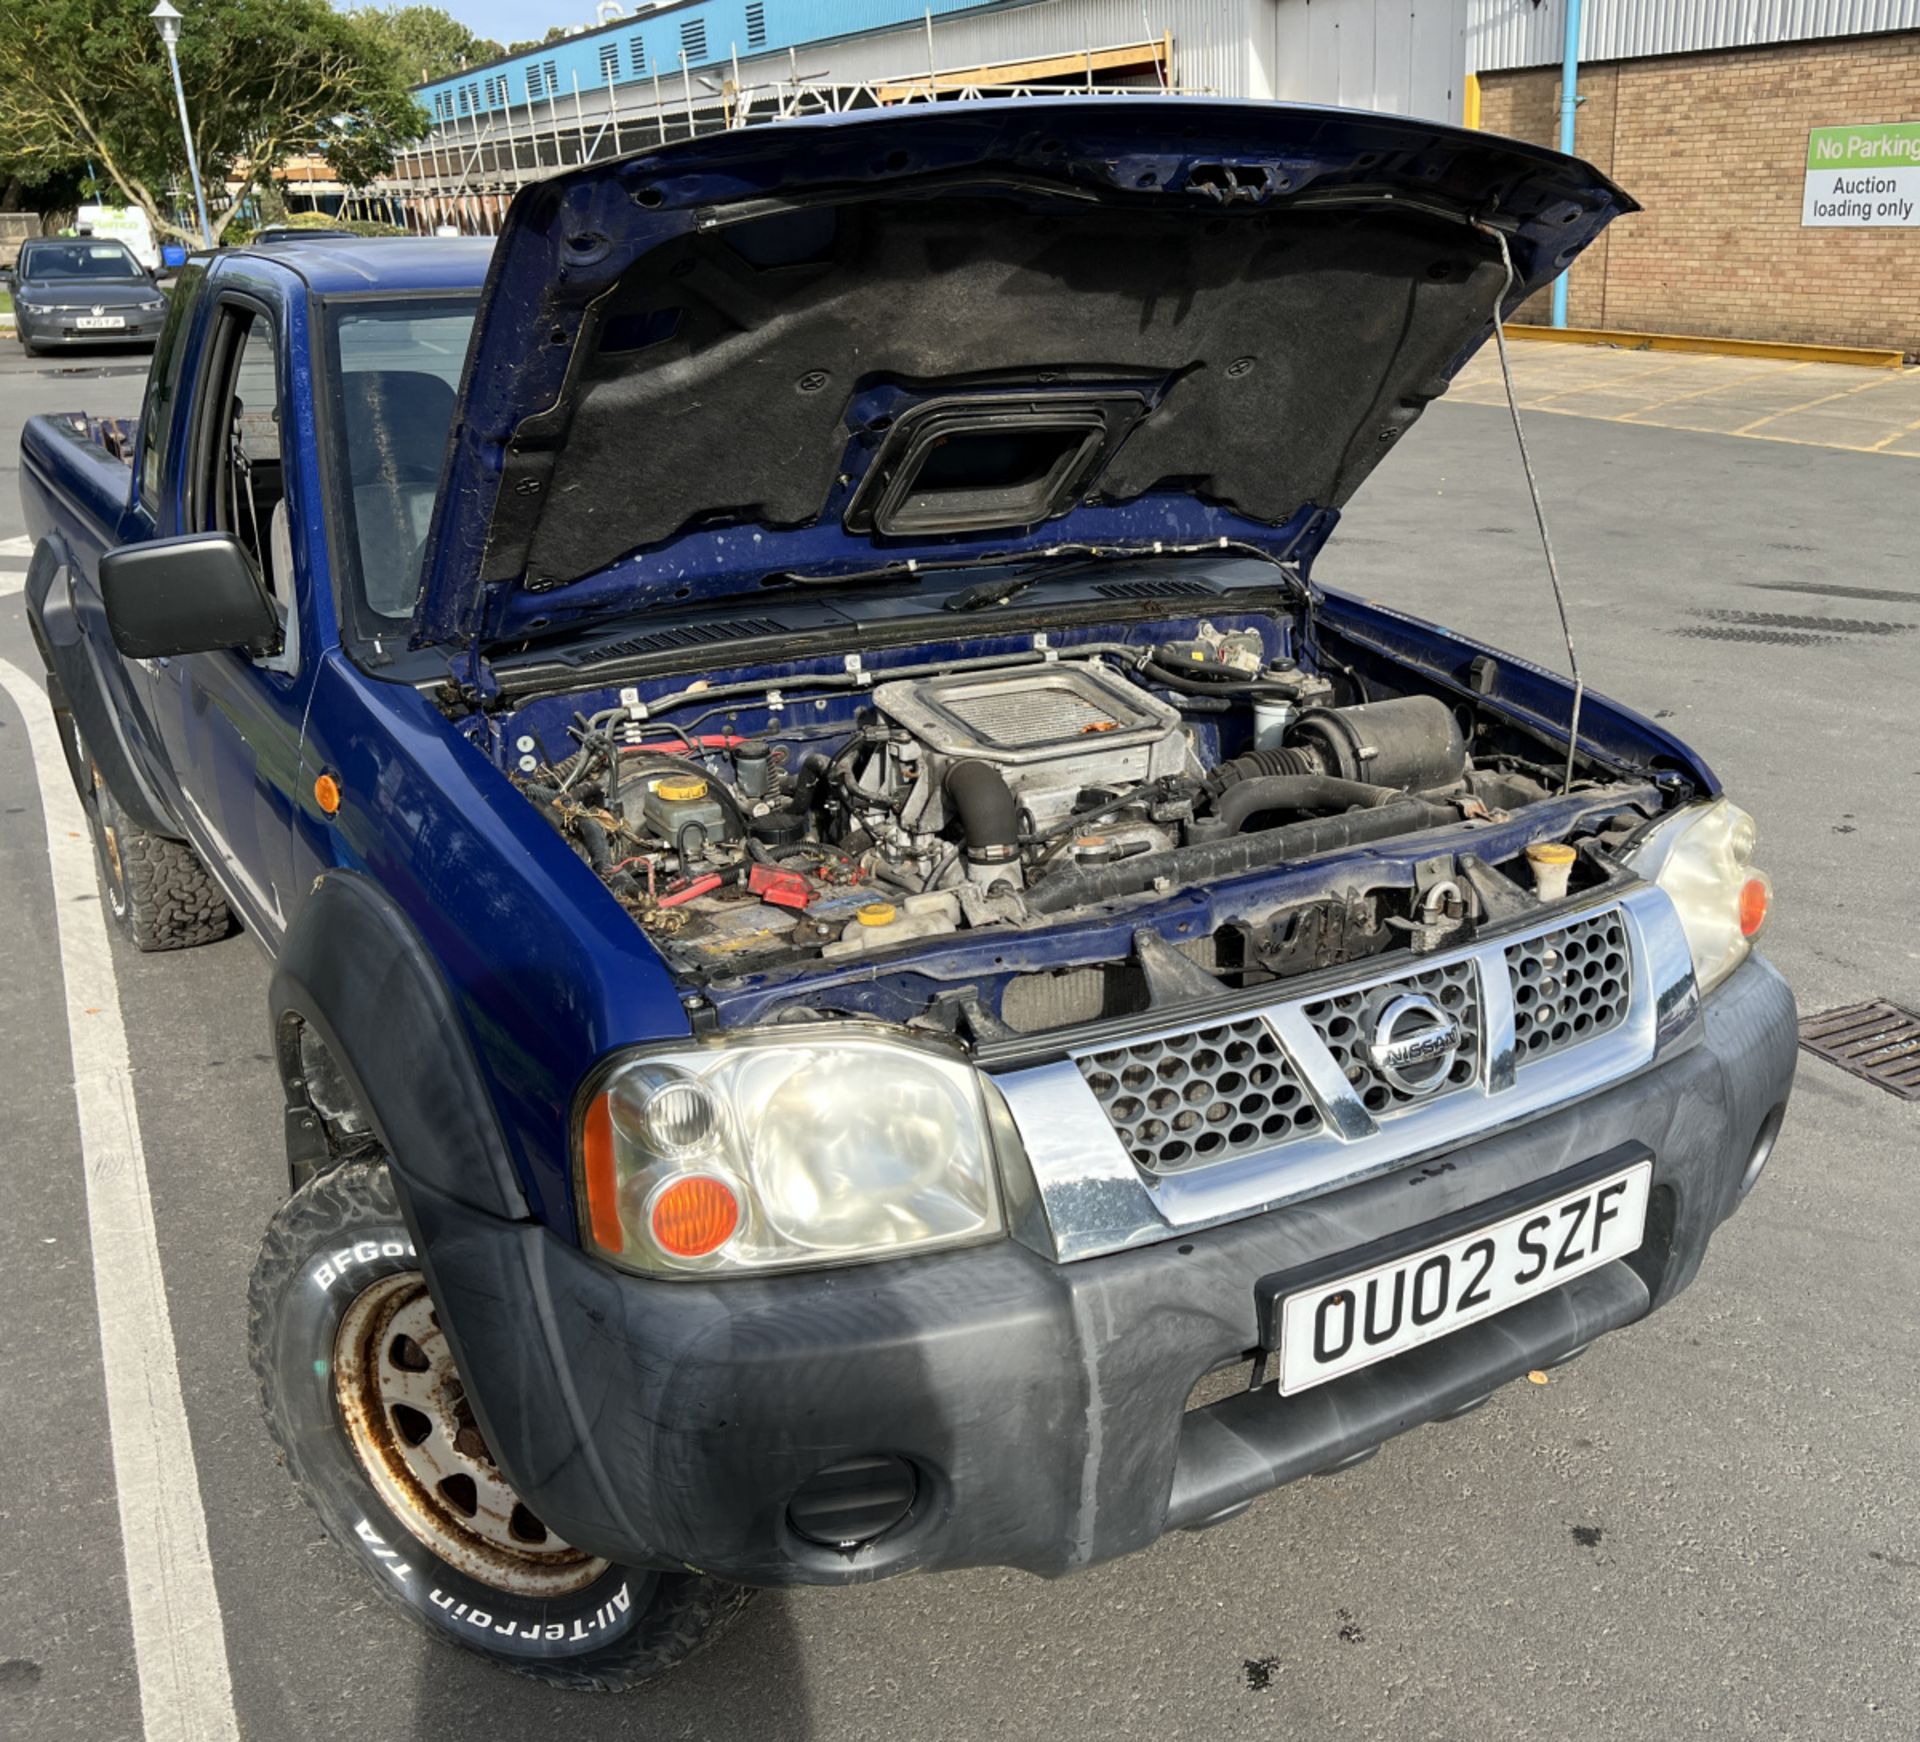 Nissan D22 Pickup with Tommy lift tail lift - 2002 - 2.5L - MOT EXPIRED PLEASE SEE DESC. - Image 33 of 37